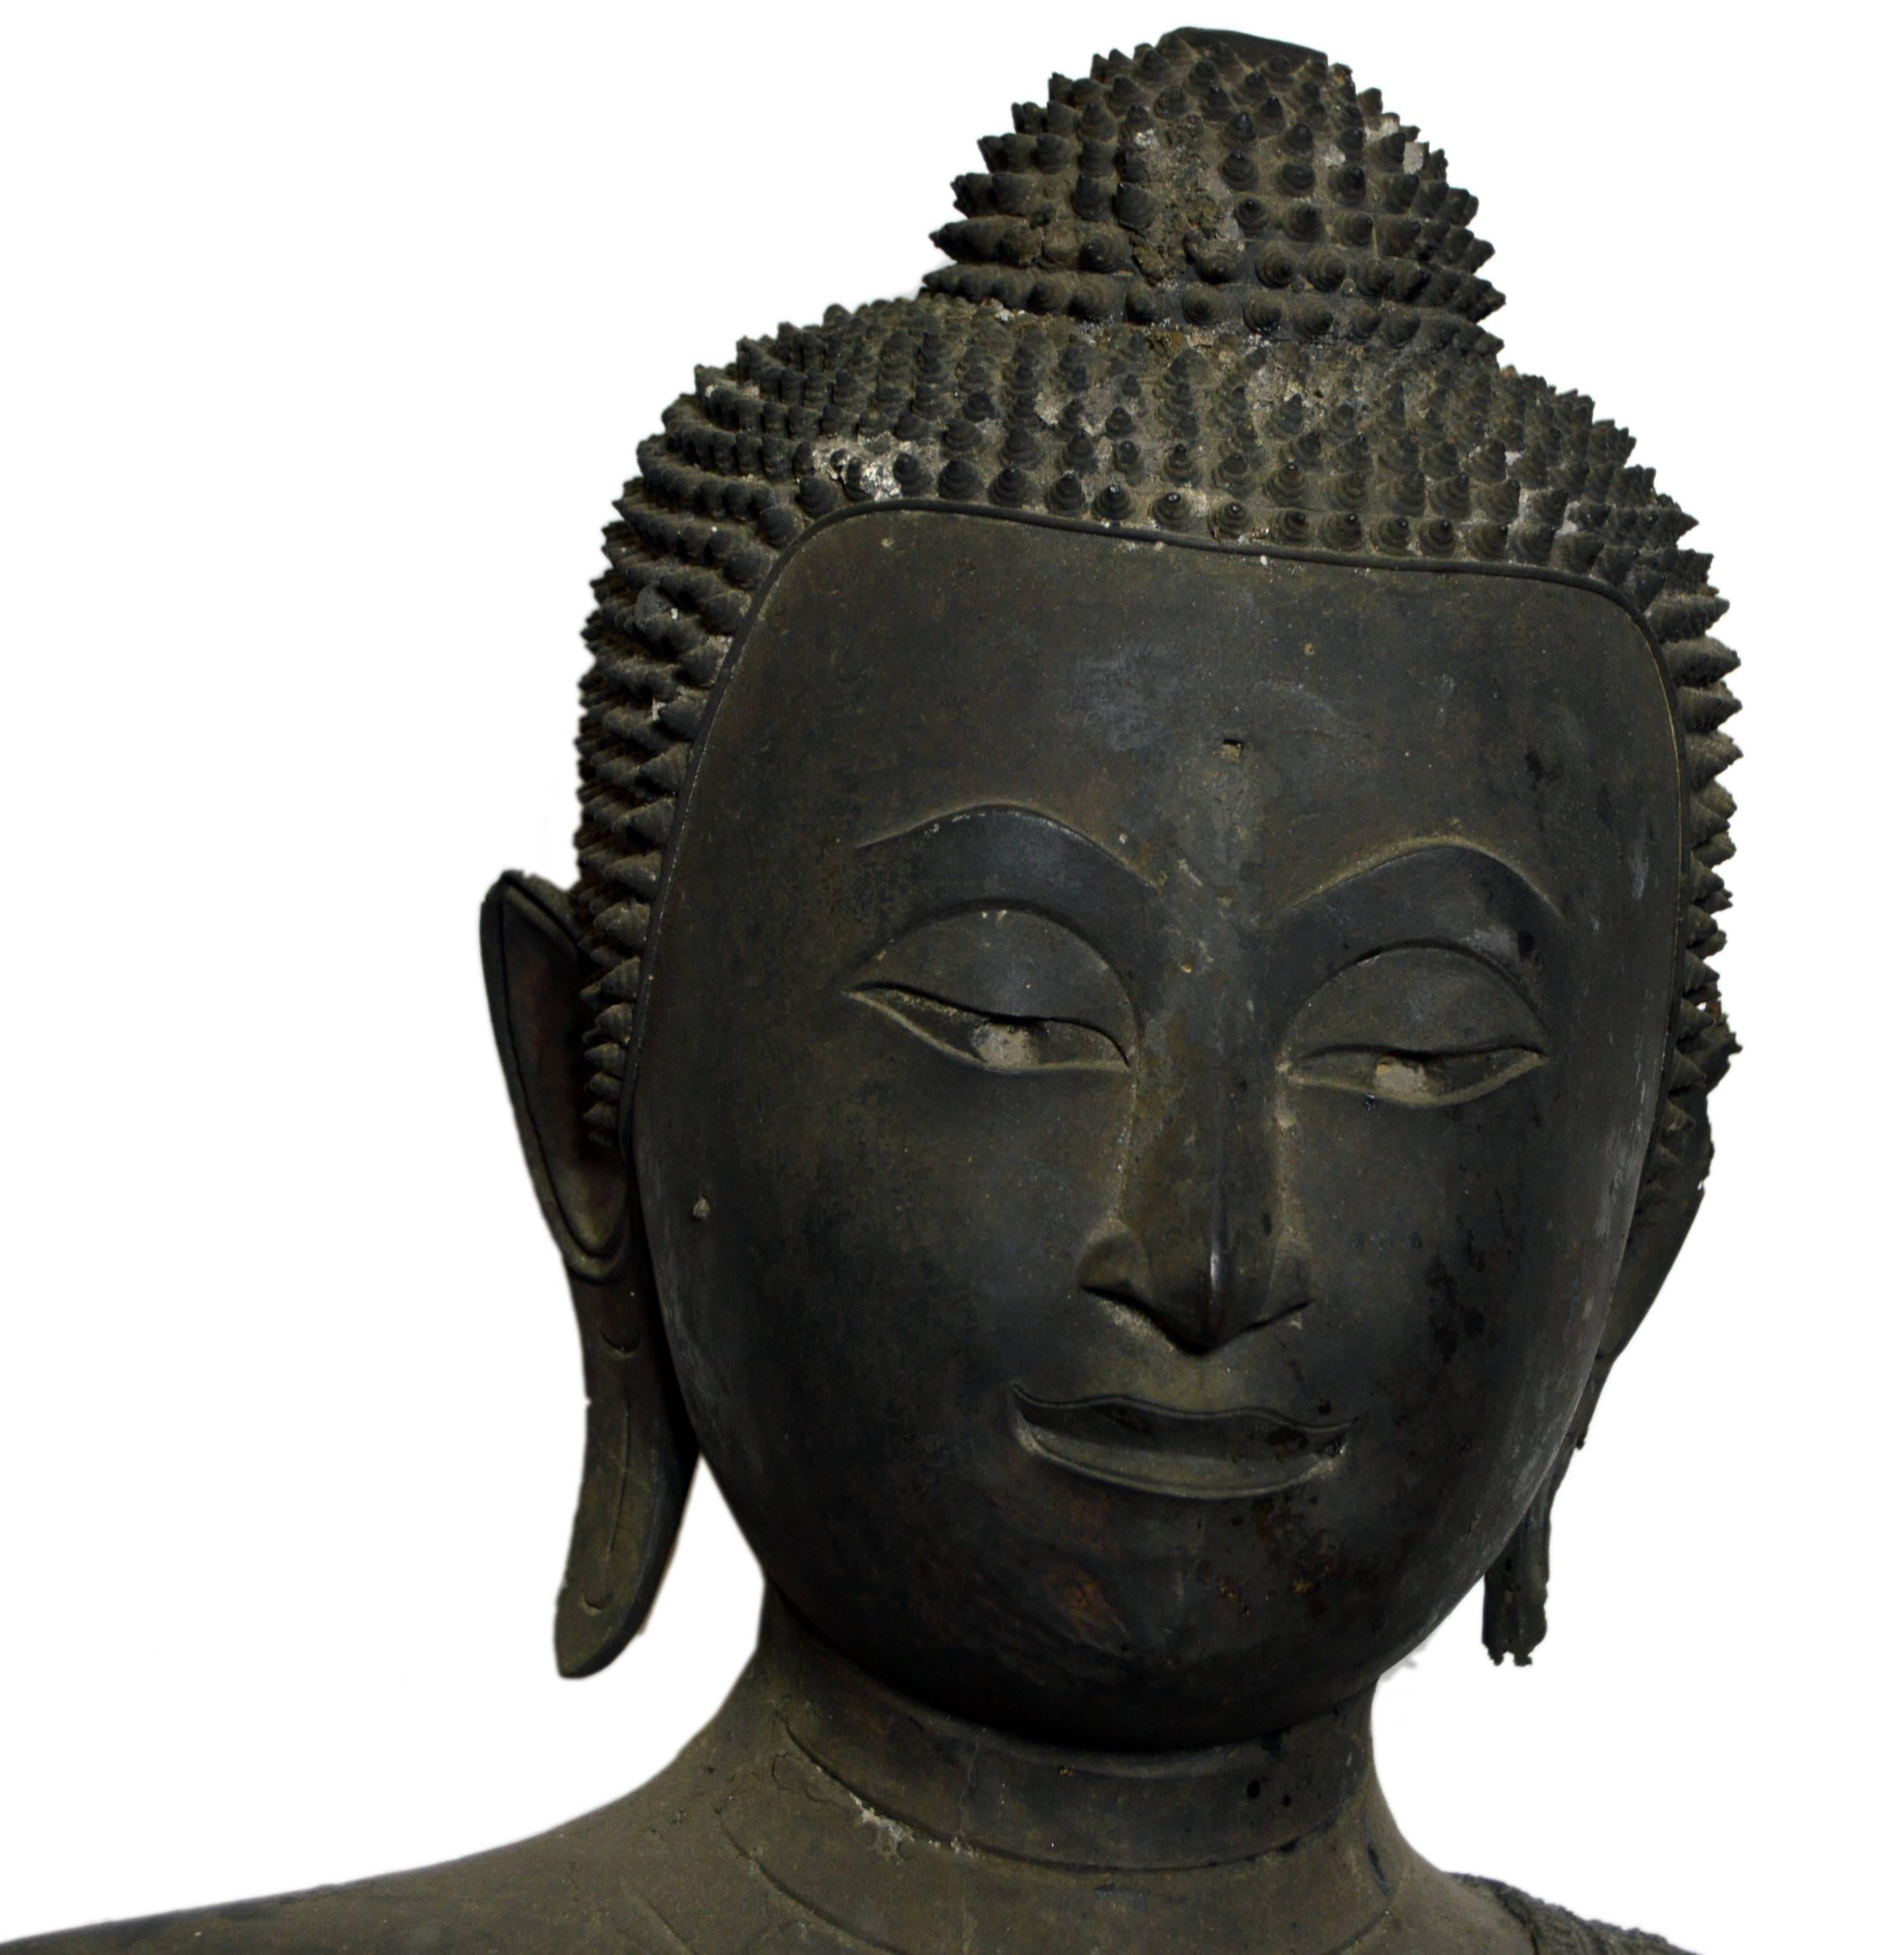 A turn of the century (19th to 20th) bronze Thai seated meditative Buddha statue with a dark patina. This Thai statue displays a seated Buddha that seems to share some similarities to the style of Buddha common in the Pala Empire in northern India